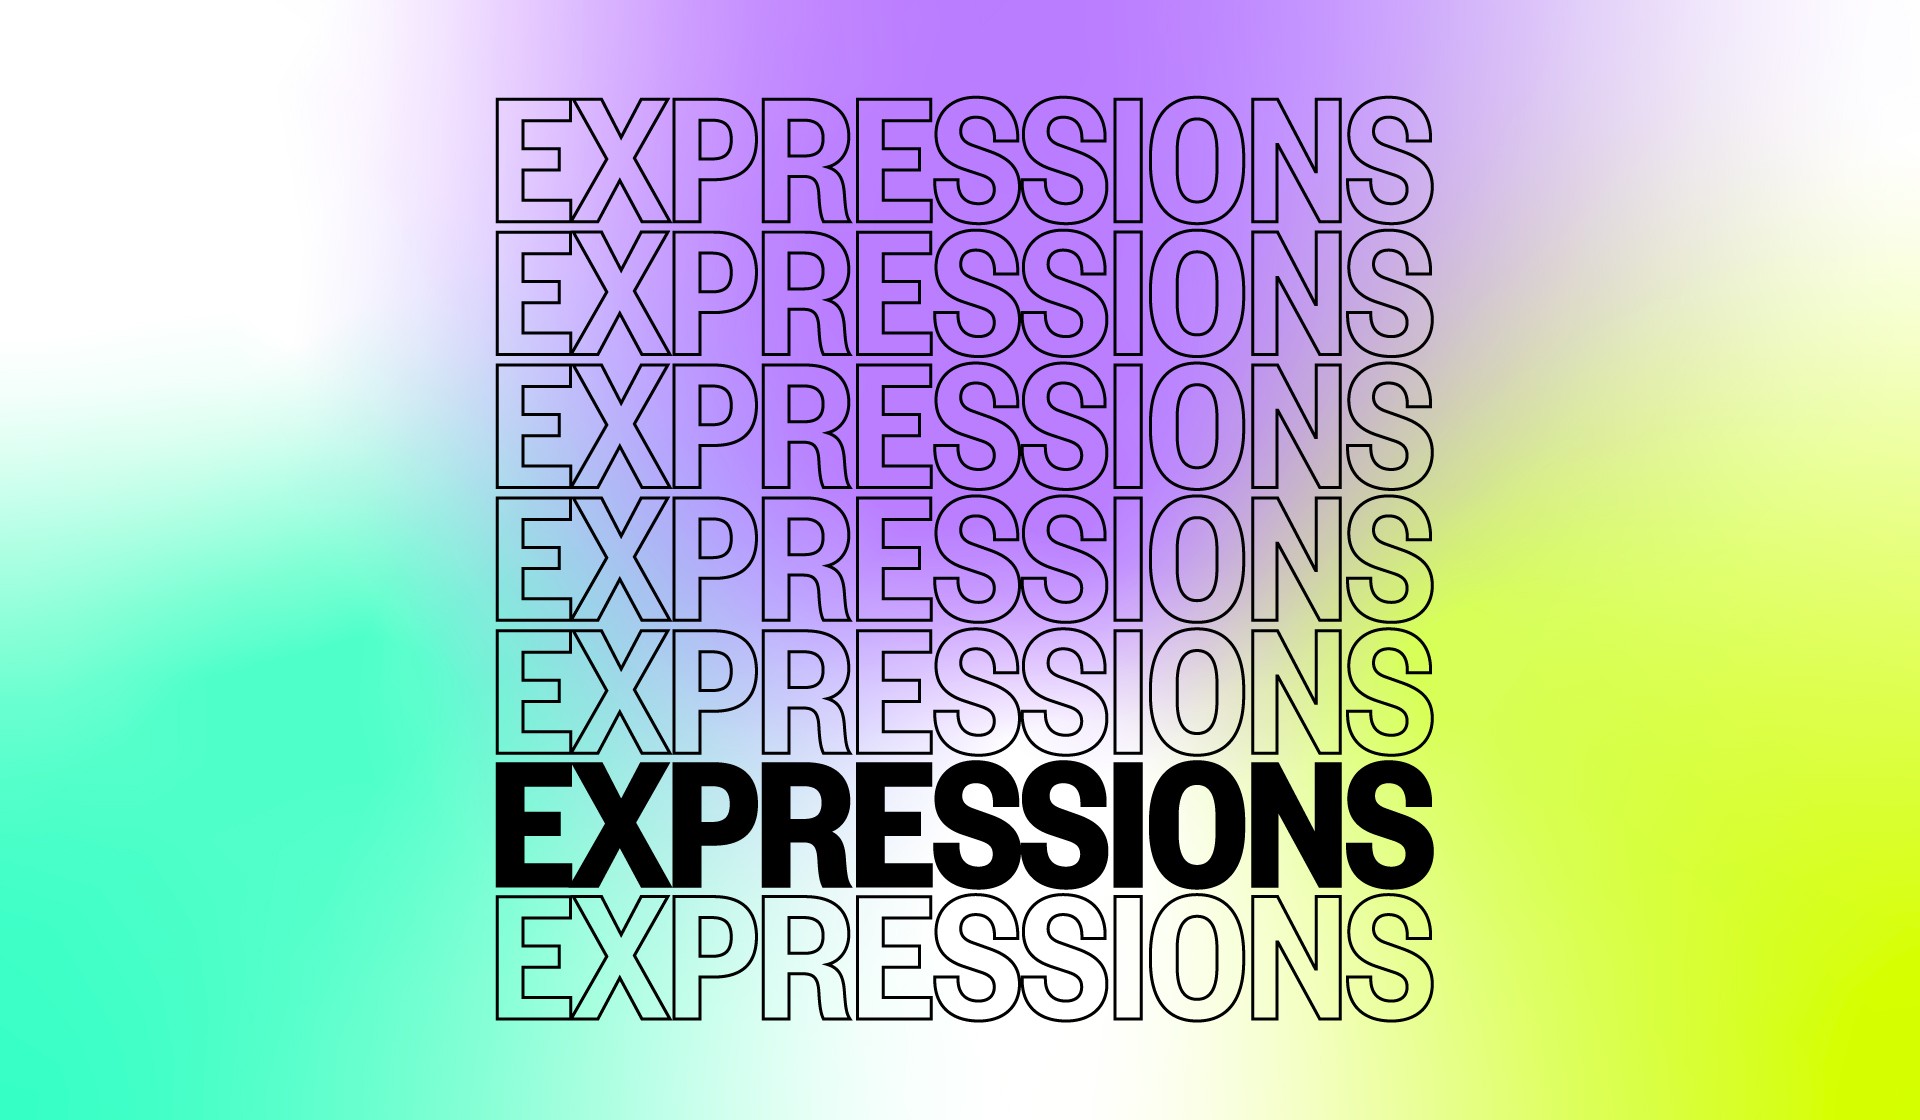 THE FOURTH ANNUAL “EXPRESSIONS” AT MDD